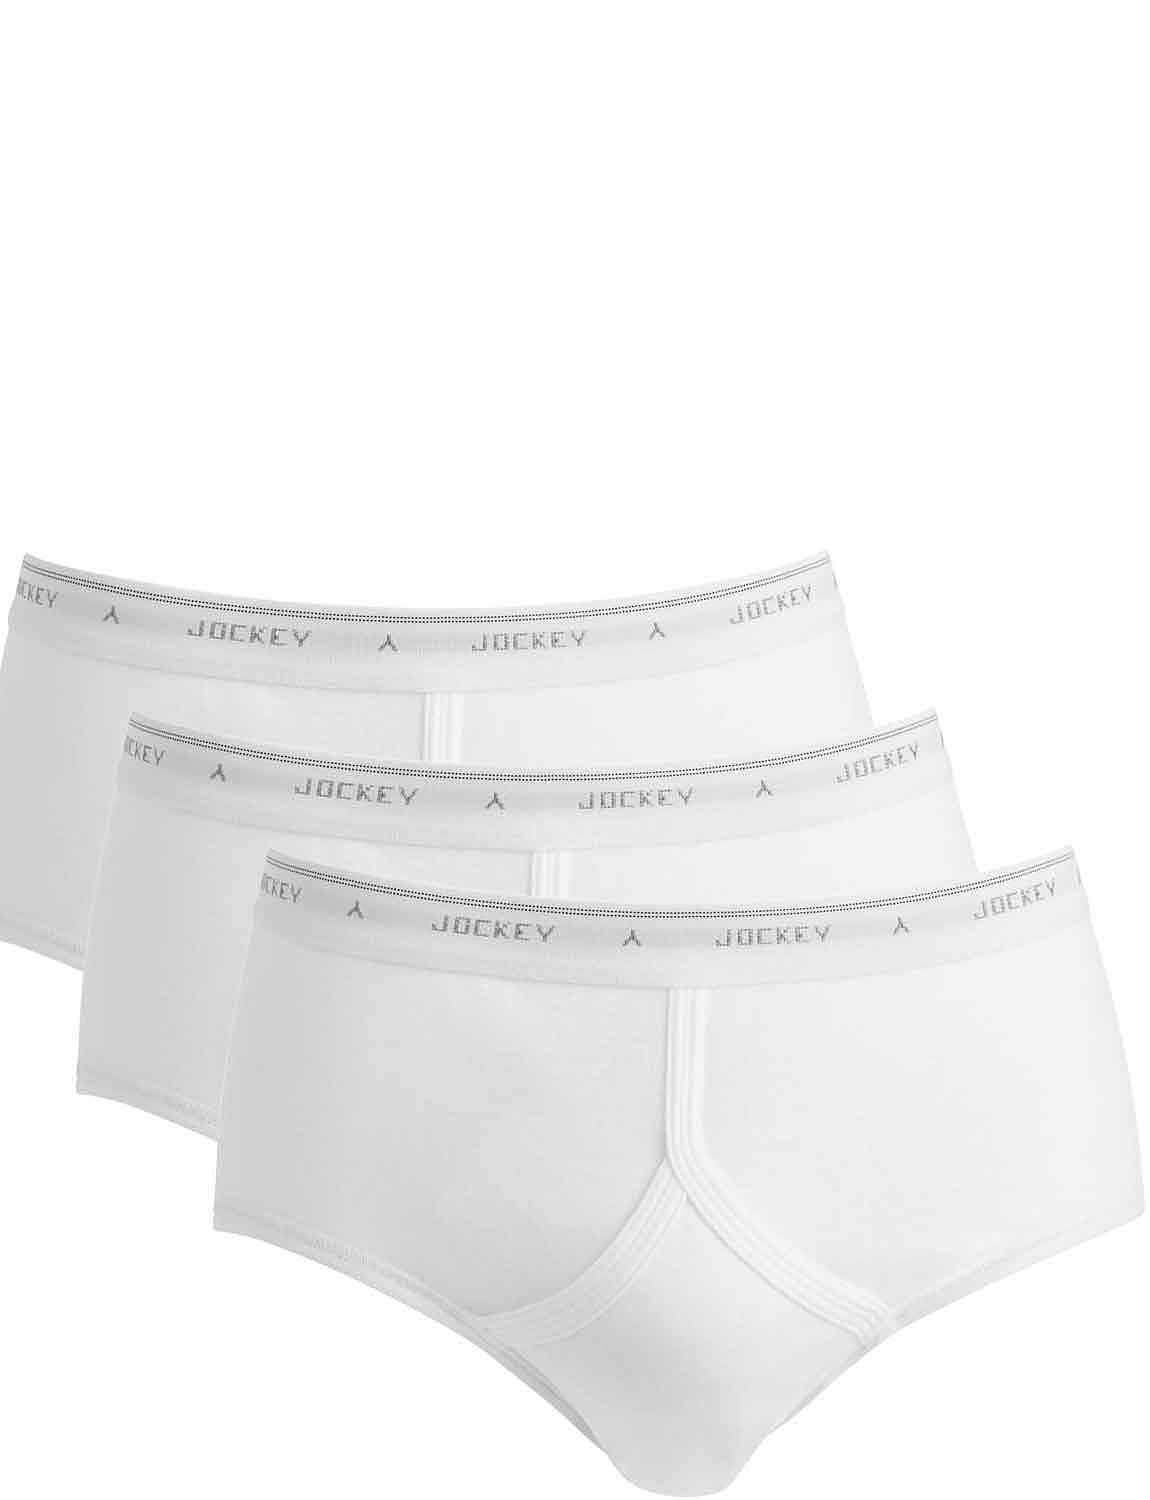 Pack of 3 Y Front Jockey Briefs | Chums